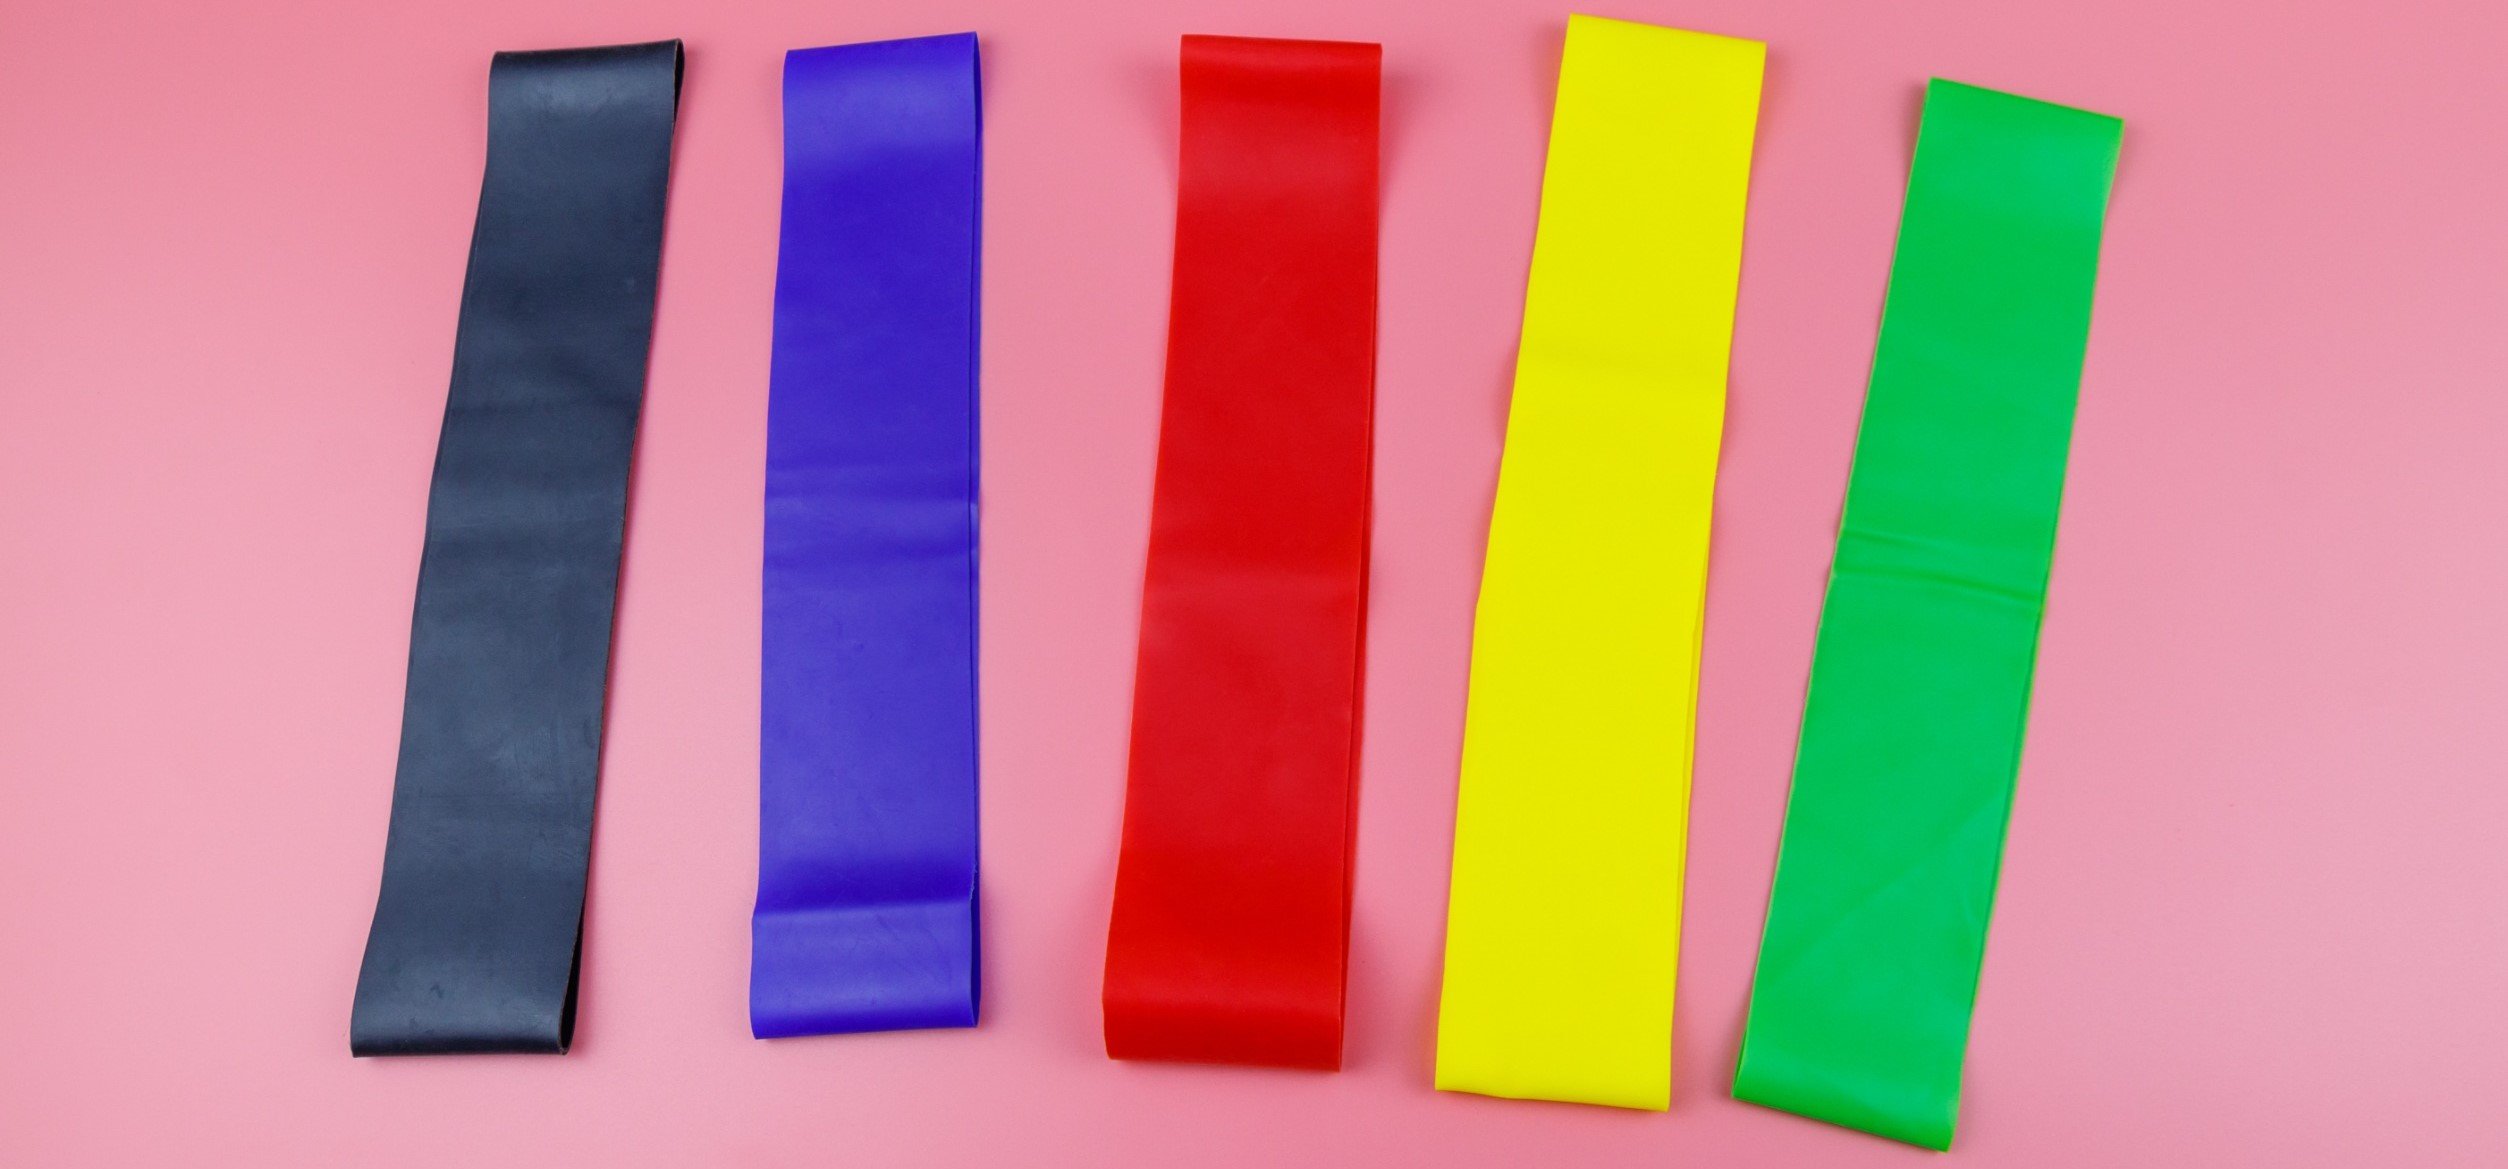 Five resistance bands in different colors